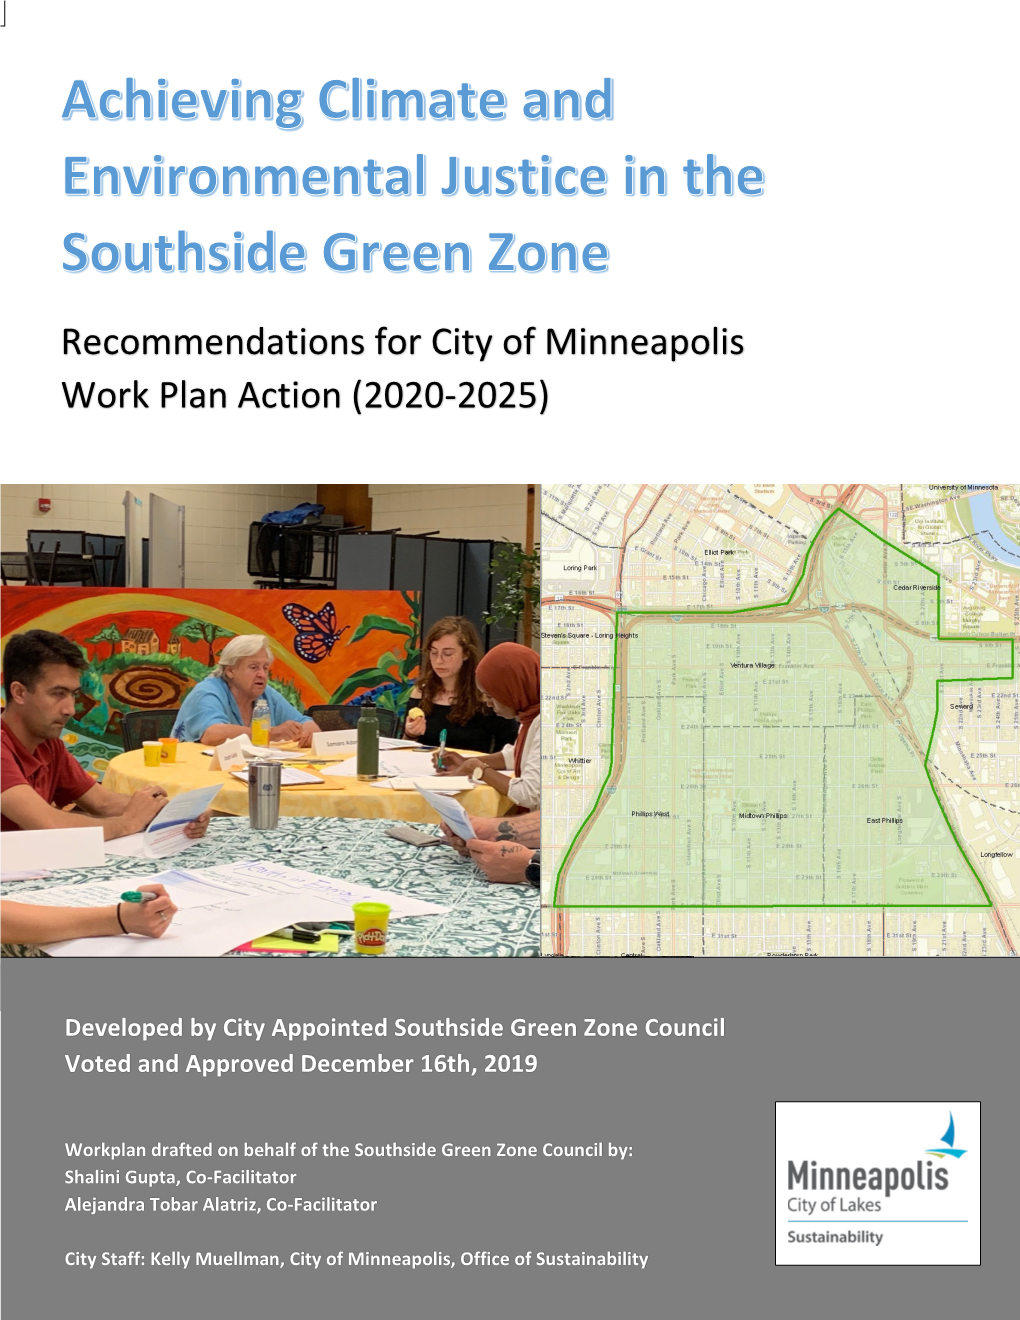 Recommendations for City of Minneapolis Work Plan Action (2020-2025)